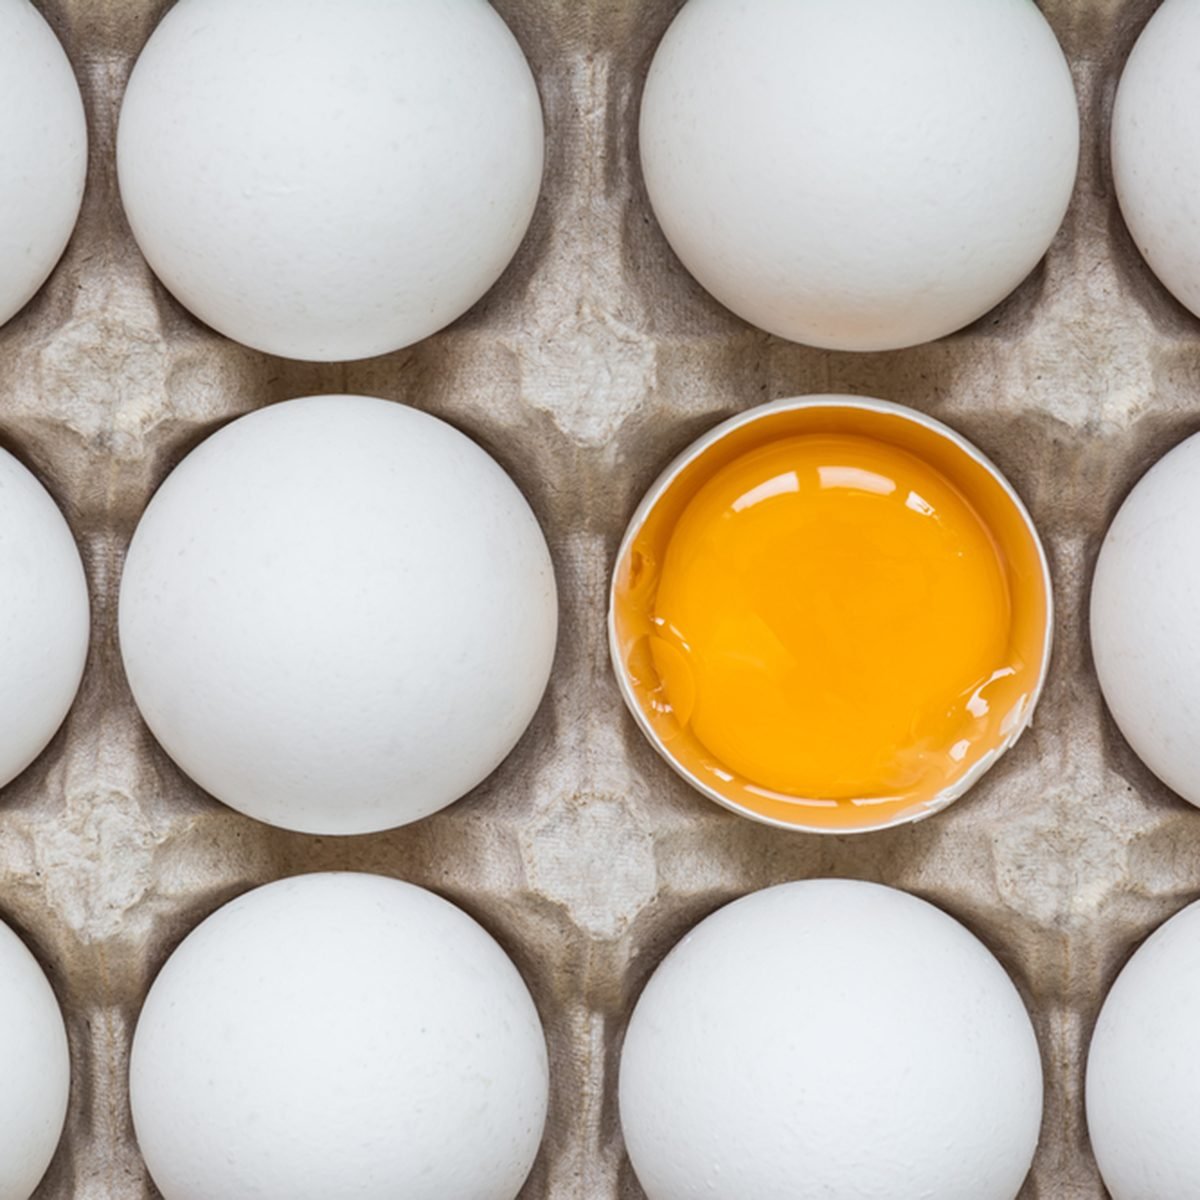 What is the Difference Between Large and Jumbo Eggs?